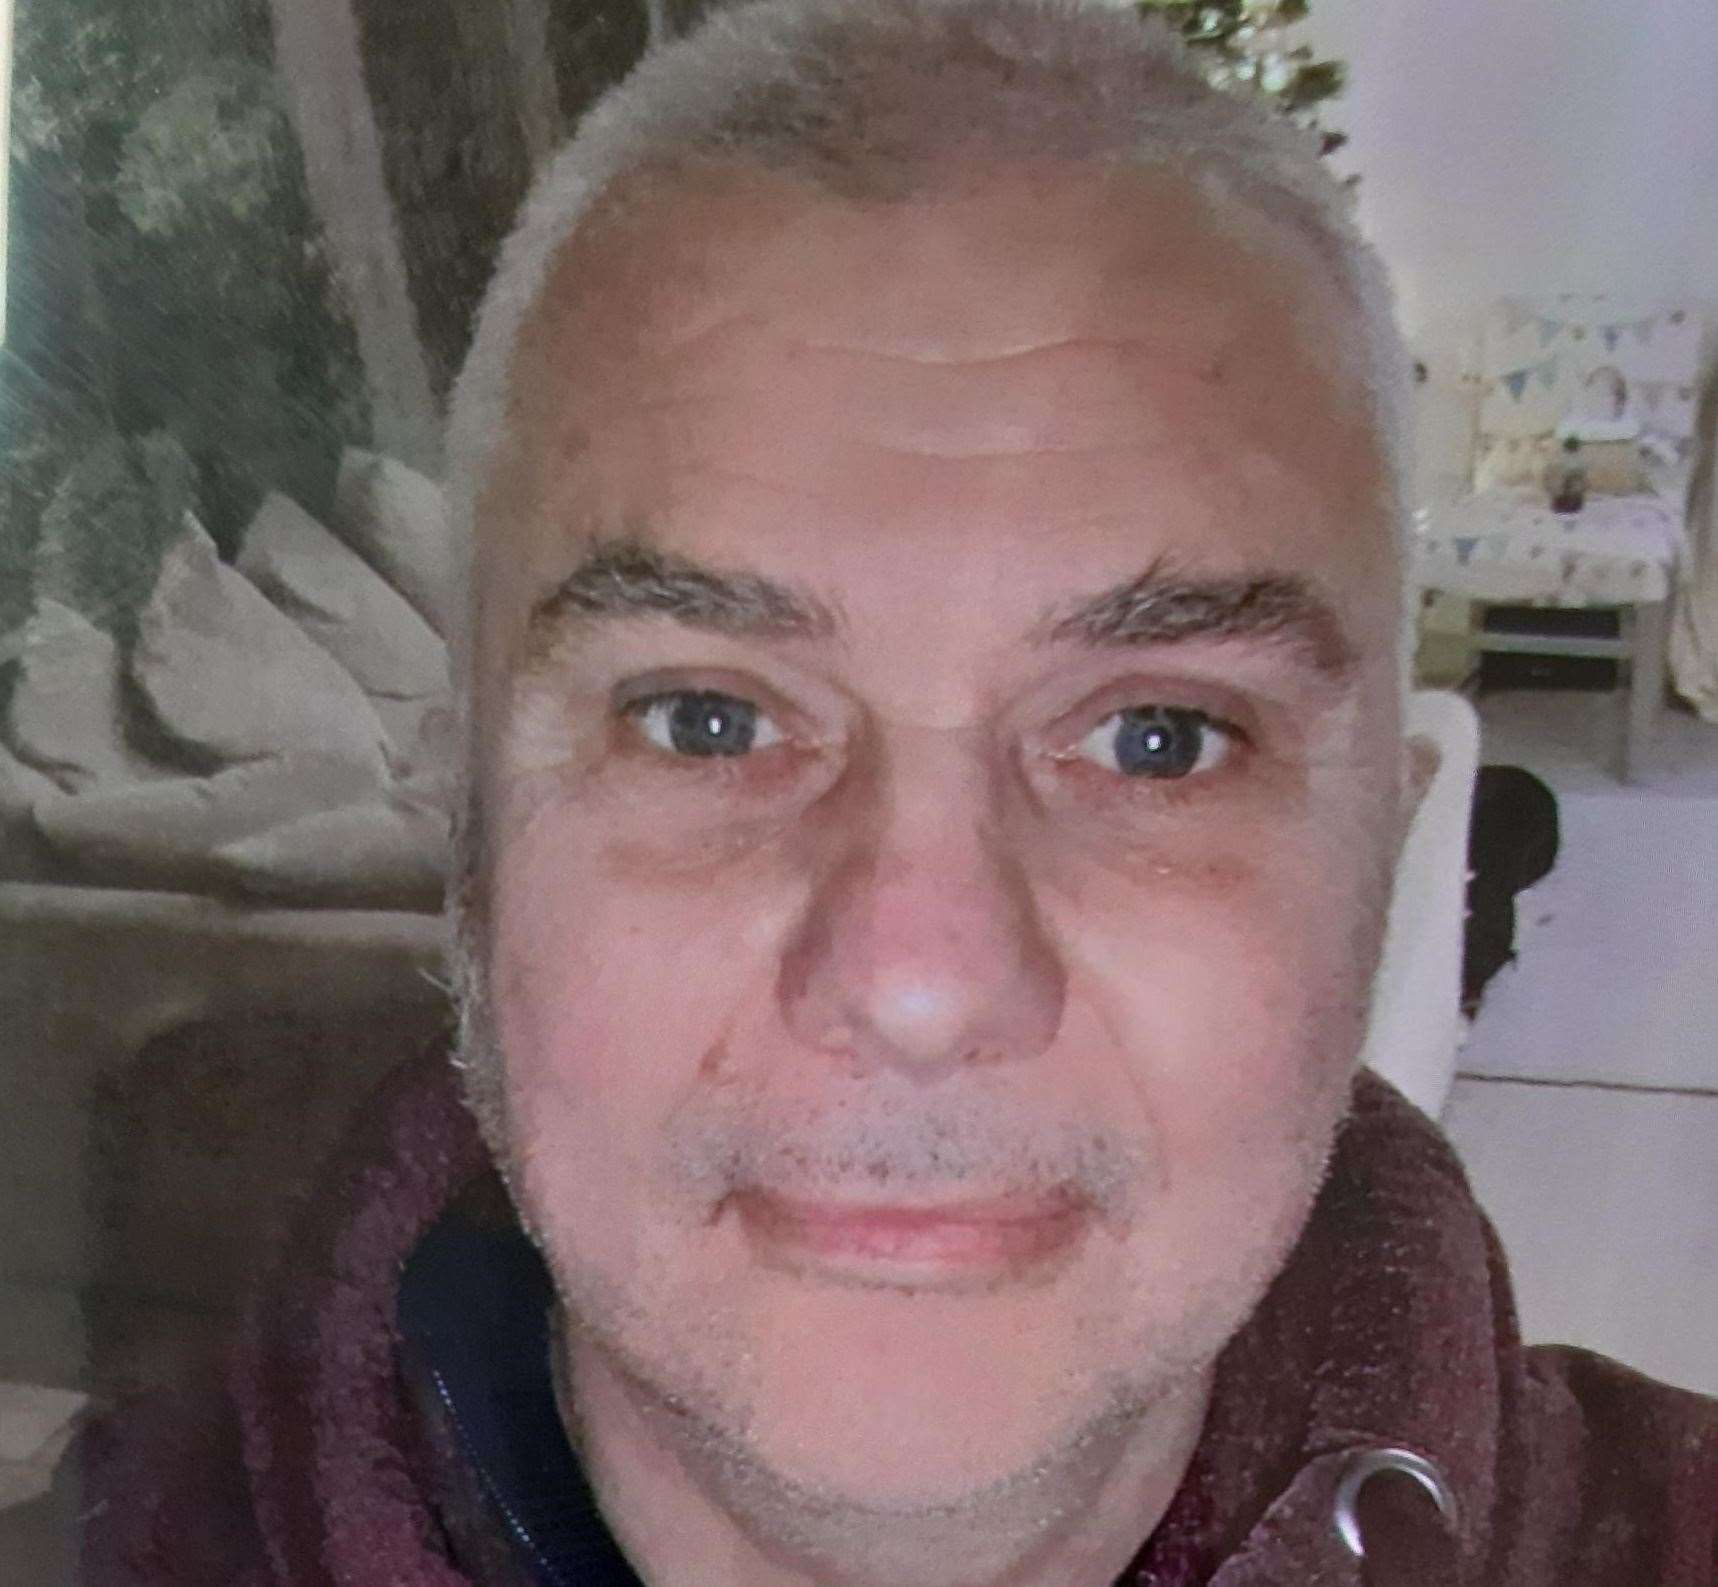 Steve White has been reported missing from Maidstone